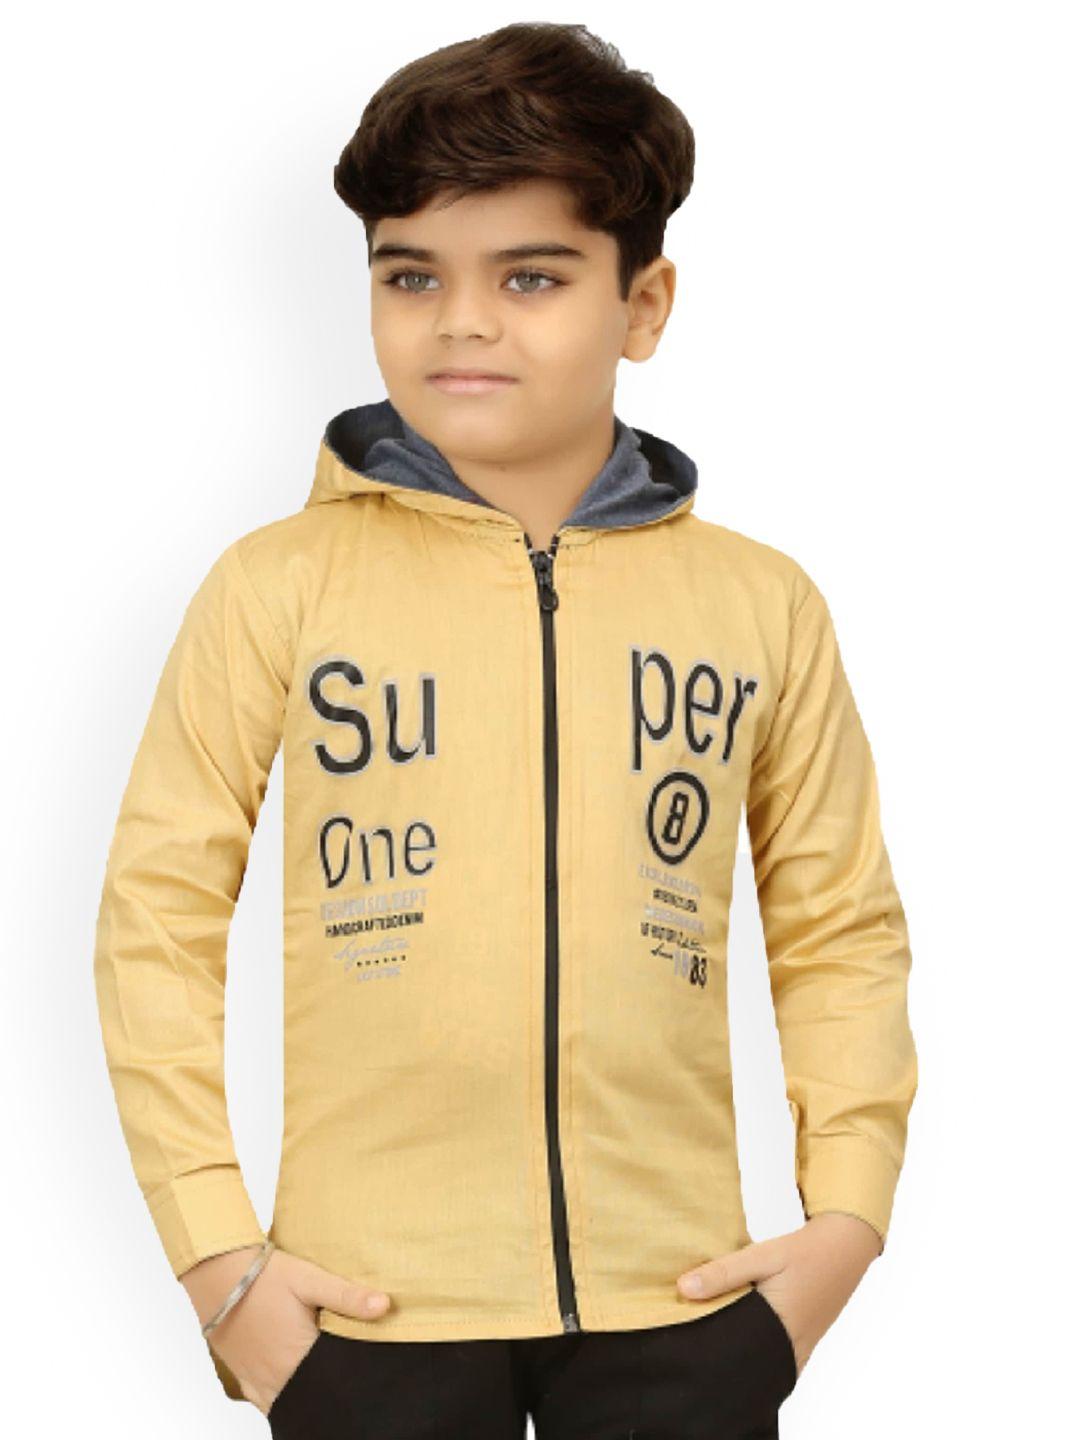 baesd boys typography printed lightweight tailored jacket with attached t-shirt